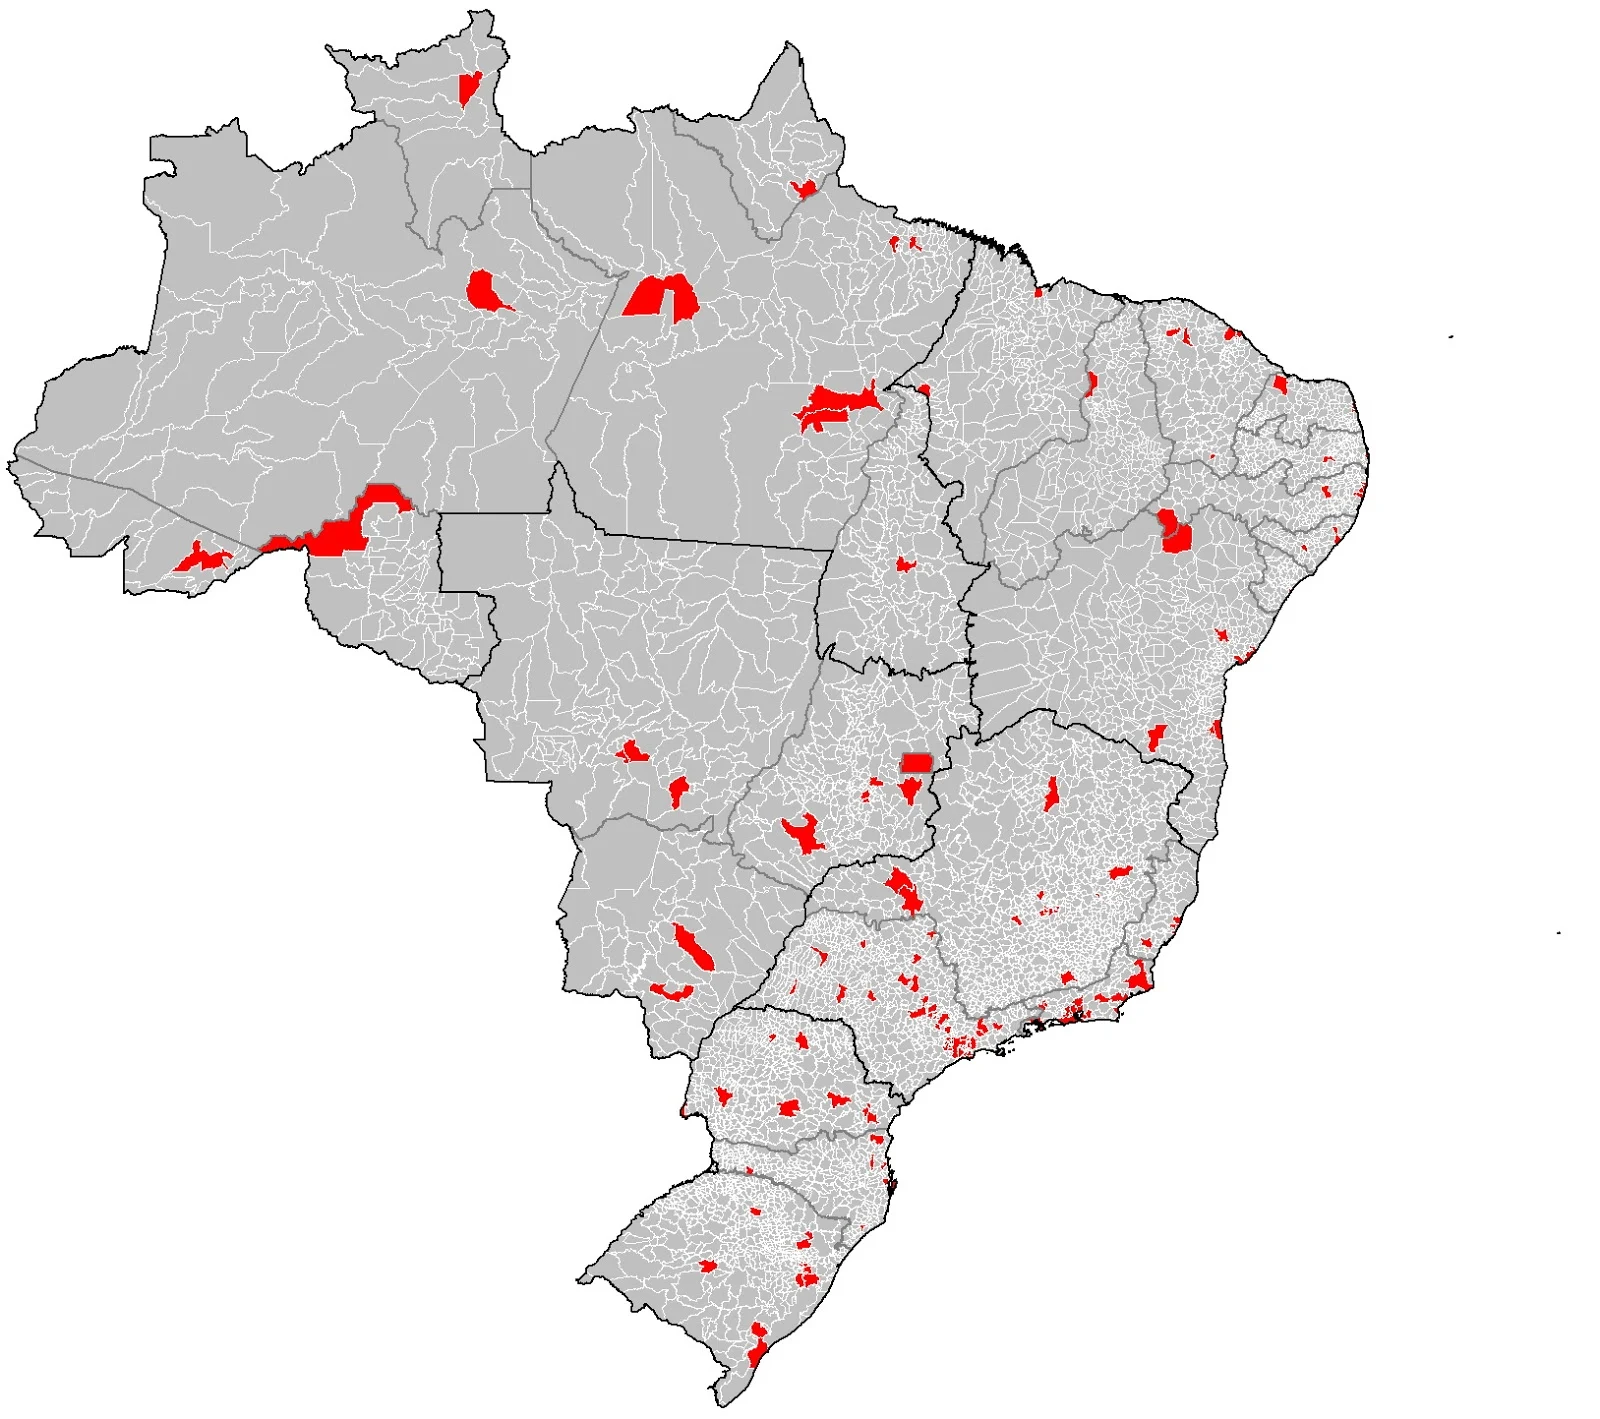 Half the population of Brazil lives in the blue shaded areas